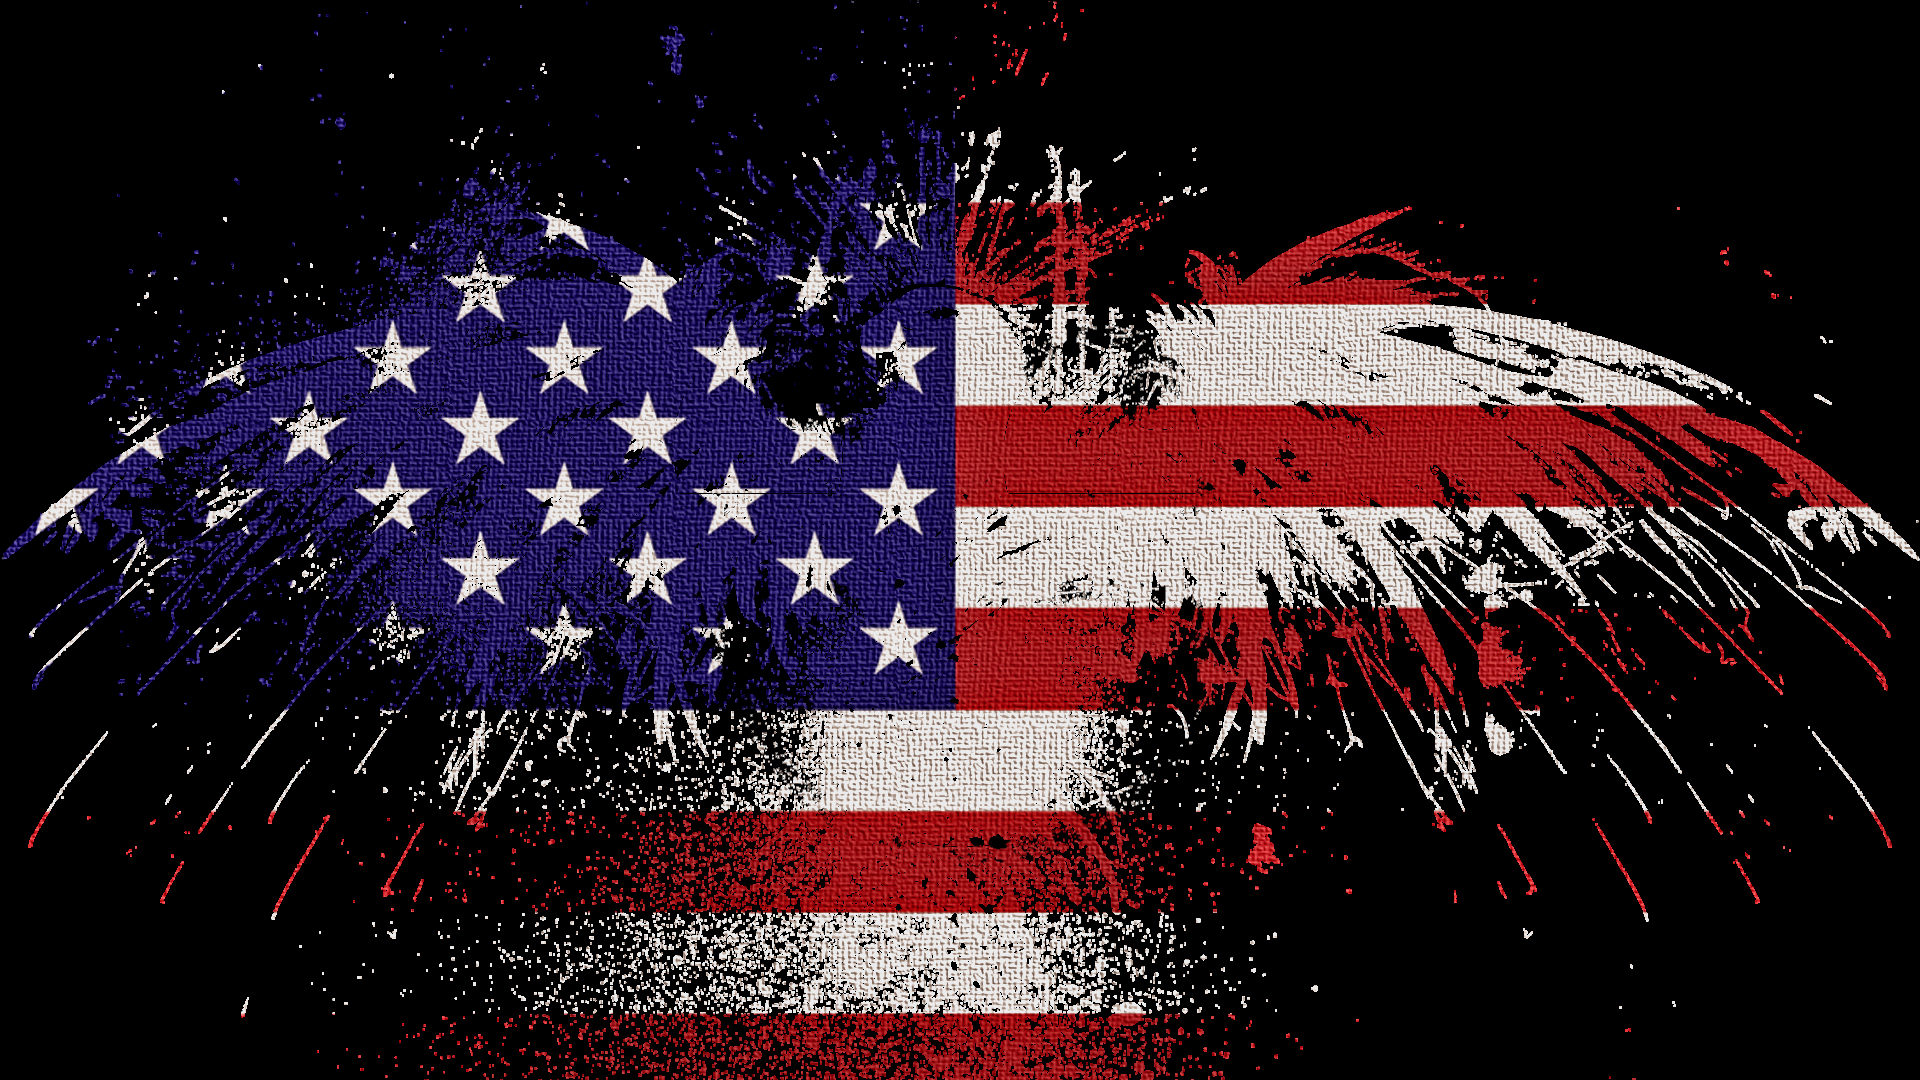 In honor of September 11 here are eight patriotic wallpapers that I